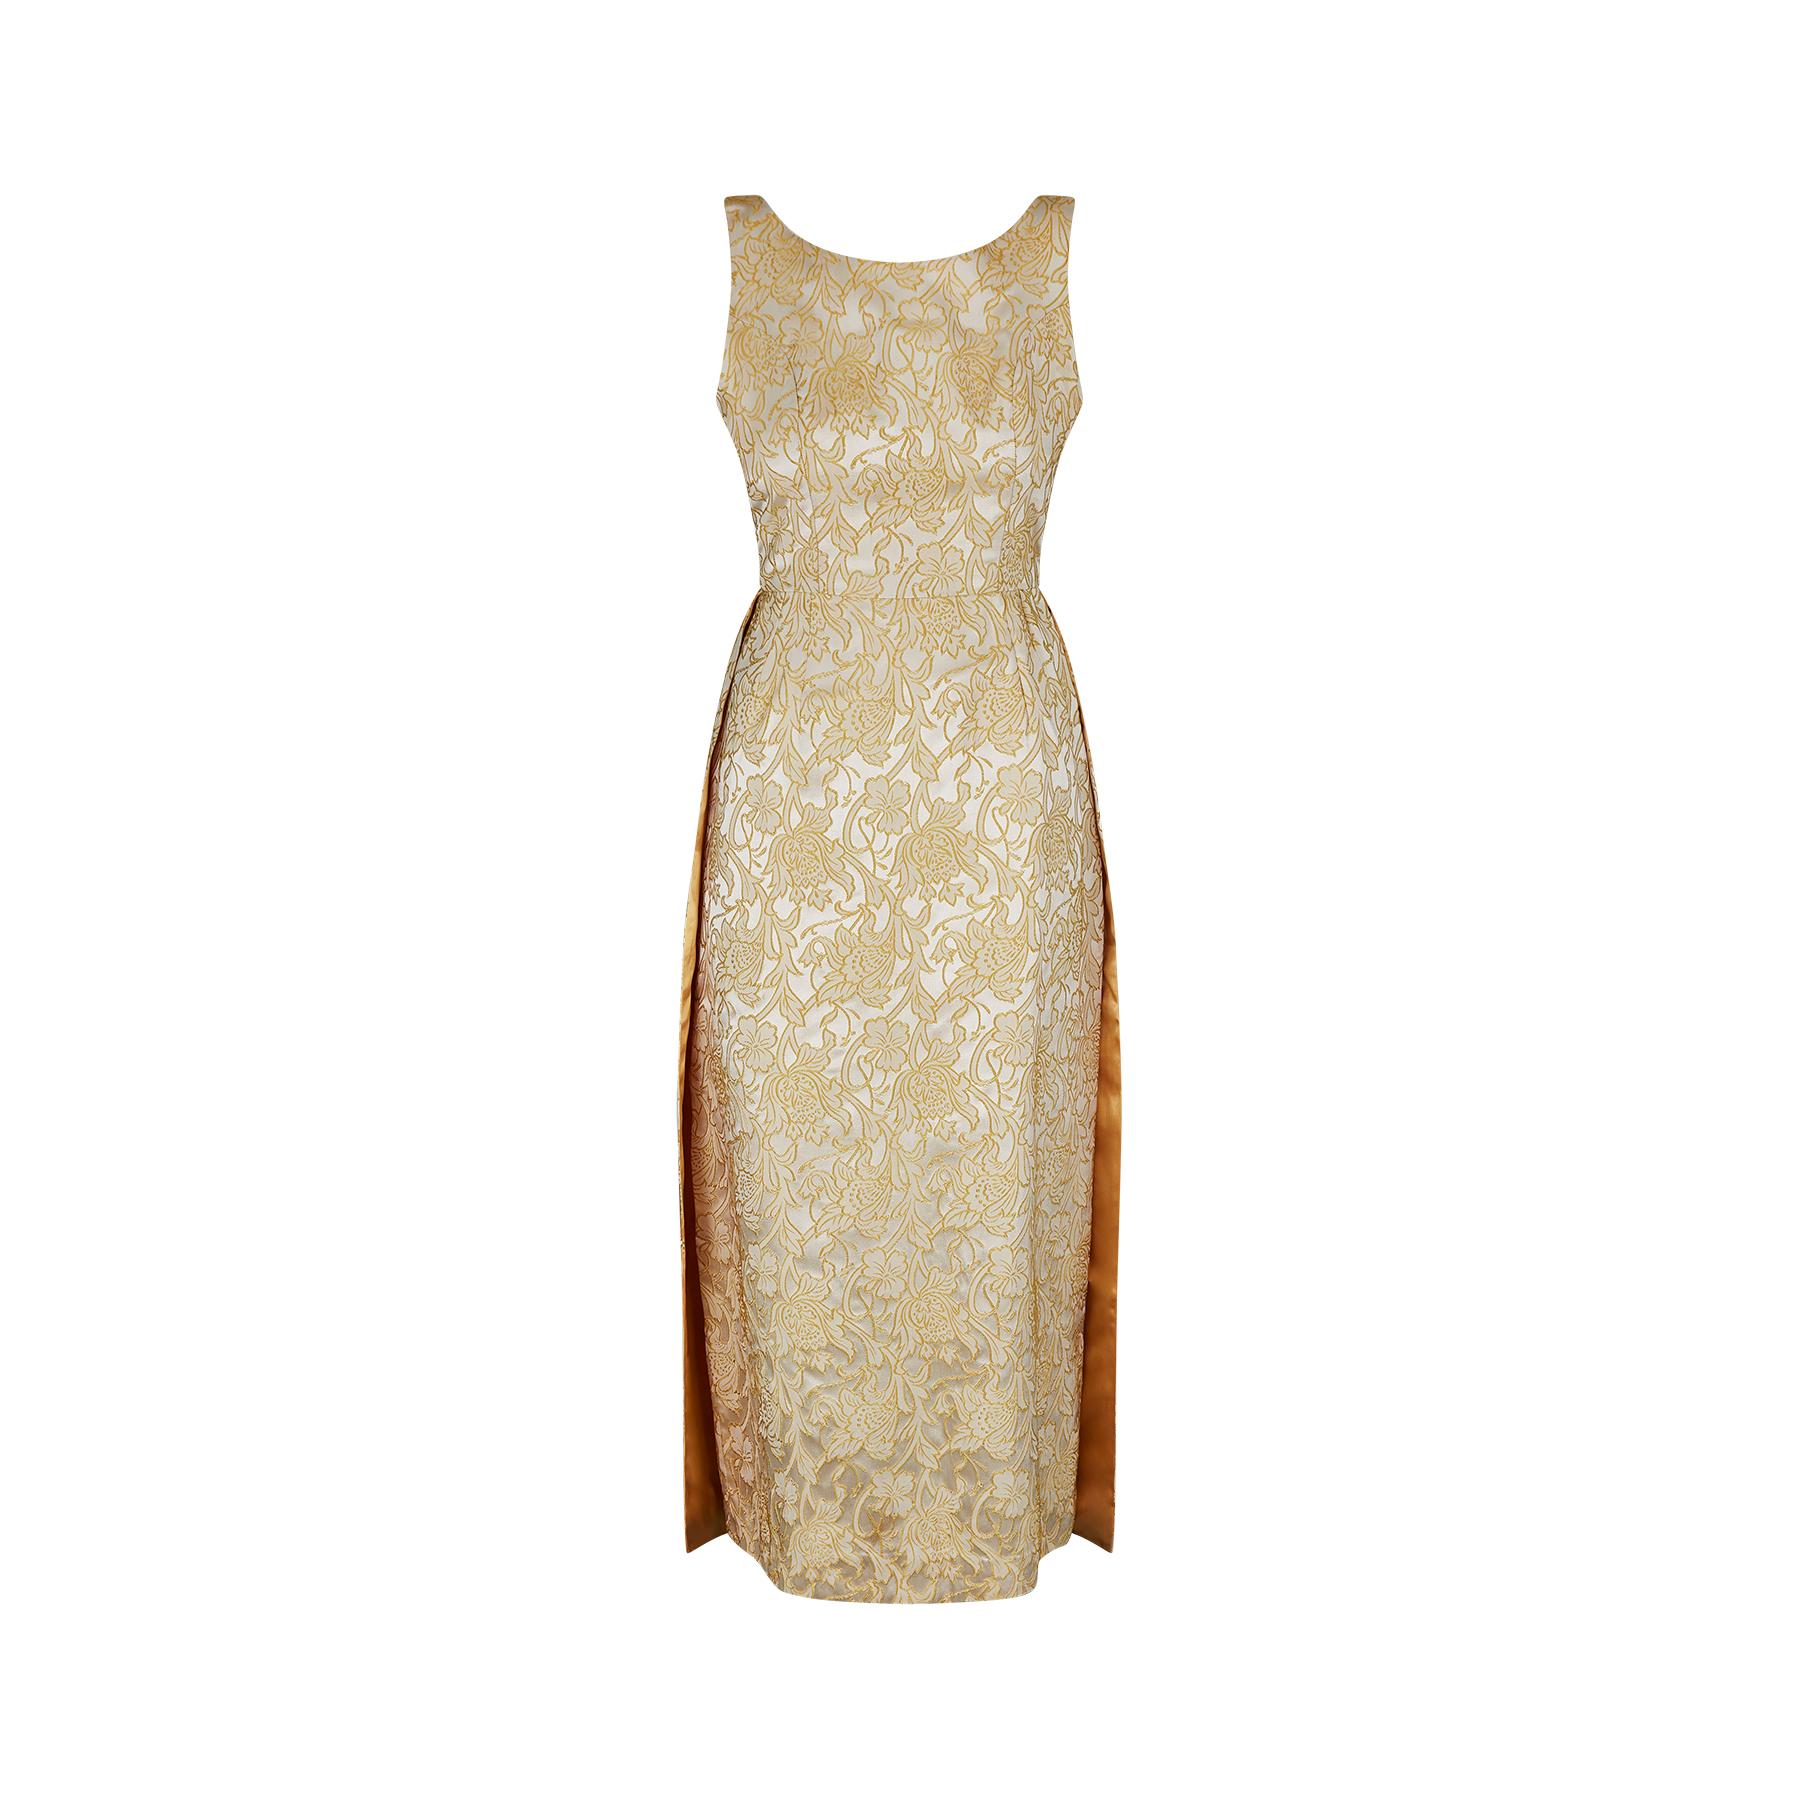 Original 1950s floral jacquard column dress with double train. The fabric of this dress is sensational and it catches the light beautifully; it is almost silver looking against a raised floral element outlined in deep golden yellow.  This dress is